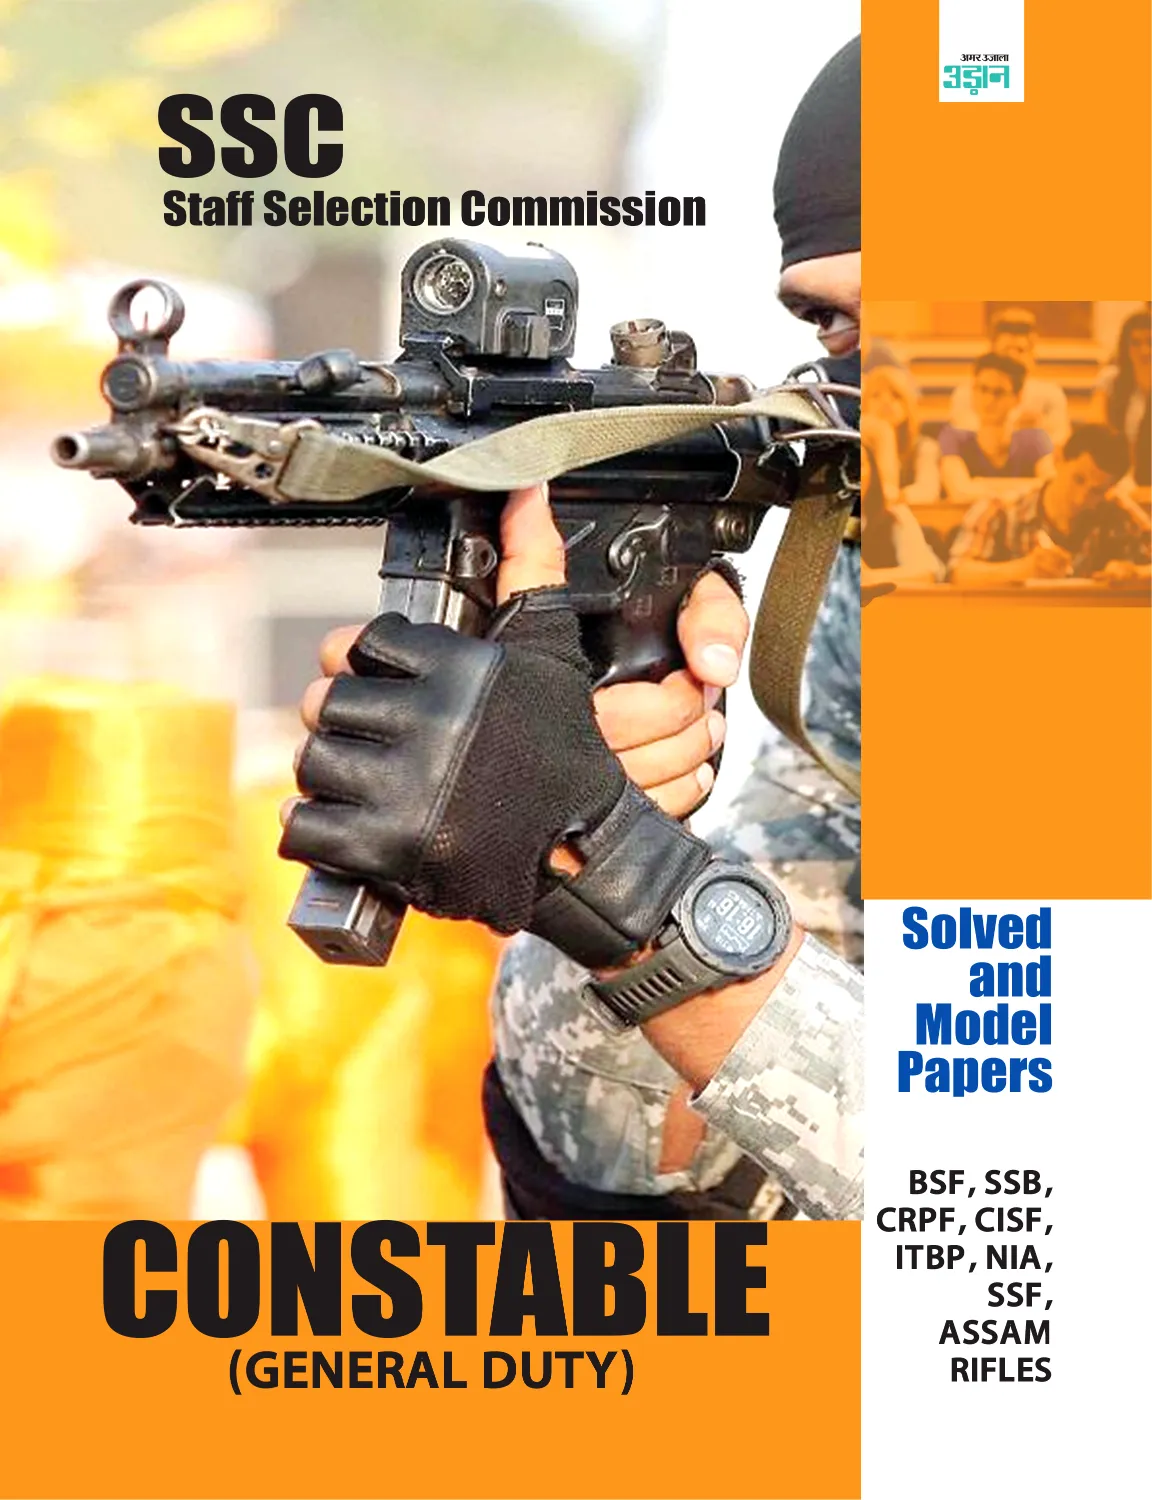 SSC Constable (GD) Exam Solved Papers and Model Papers